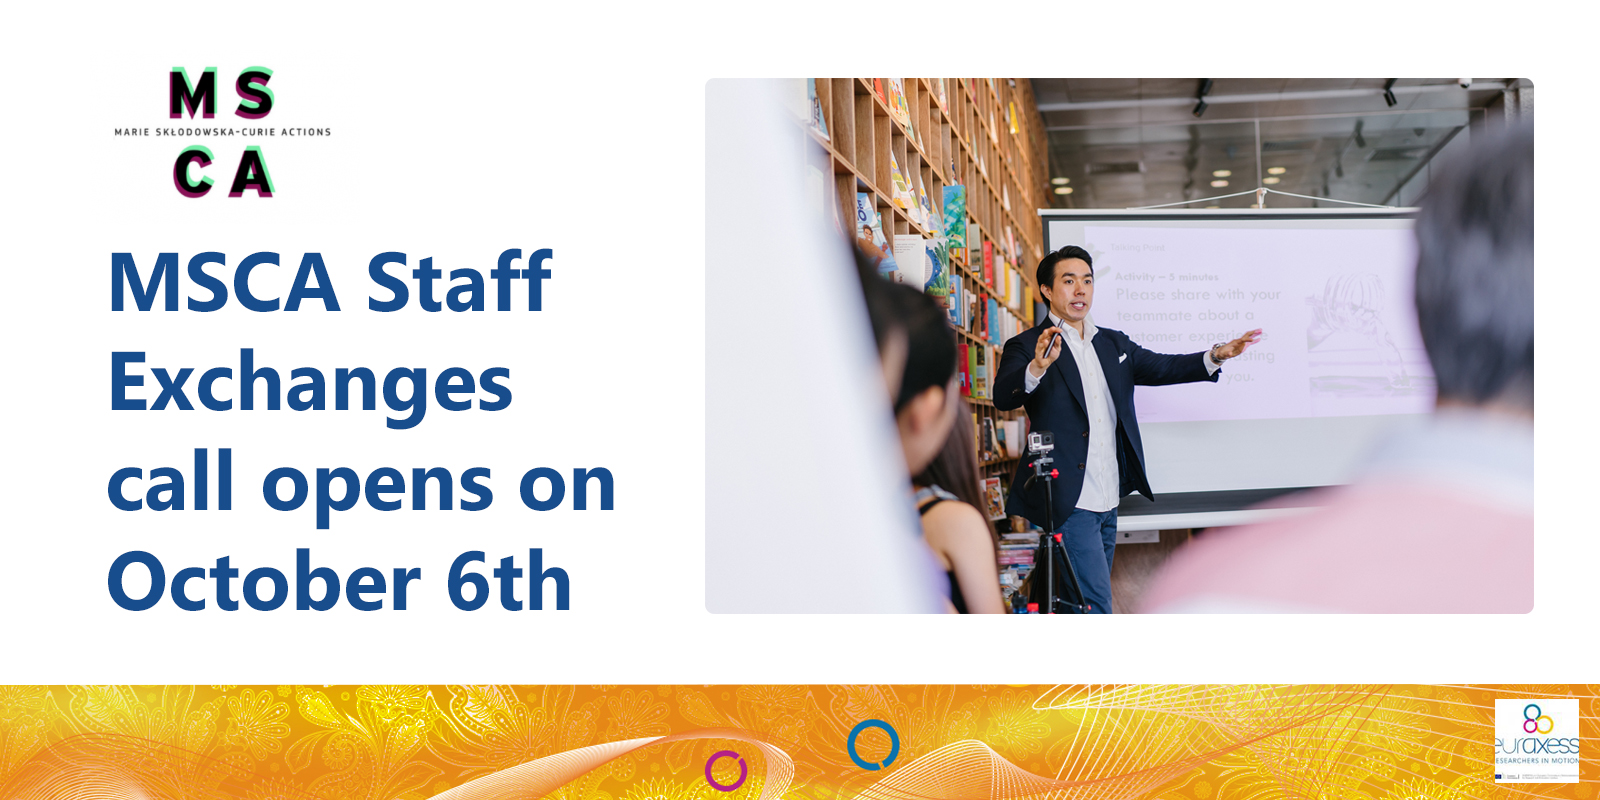 MSCA Staff Exchanges call opens on October 6th | EURAXESS